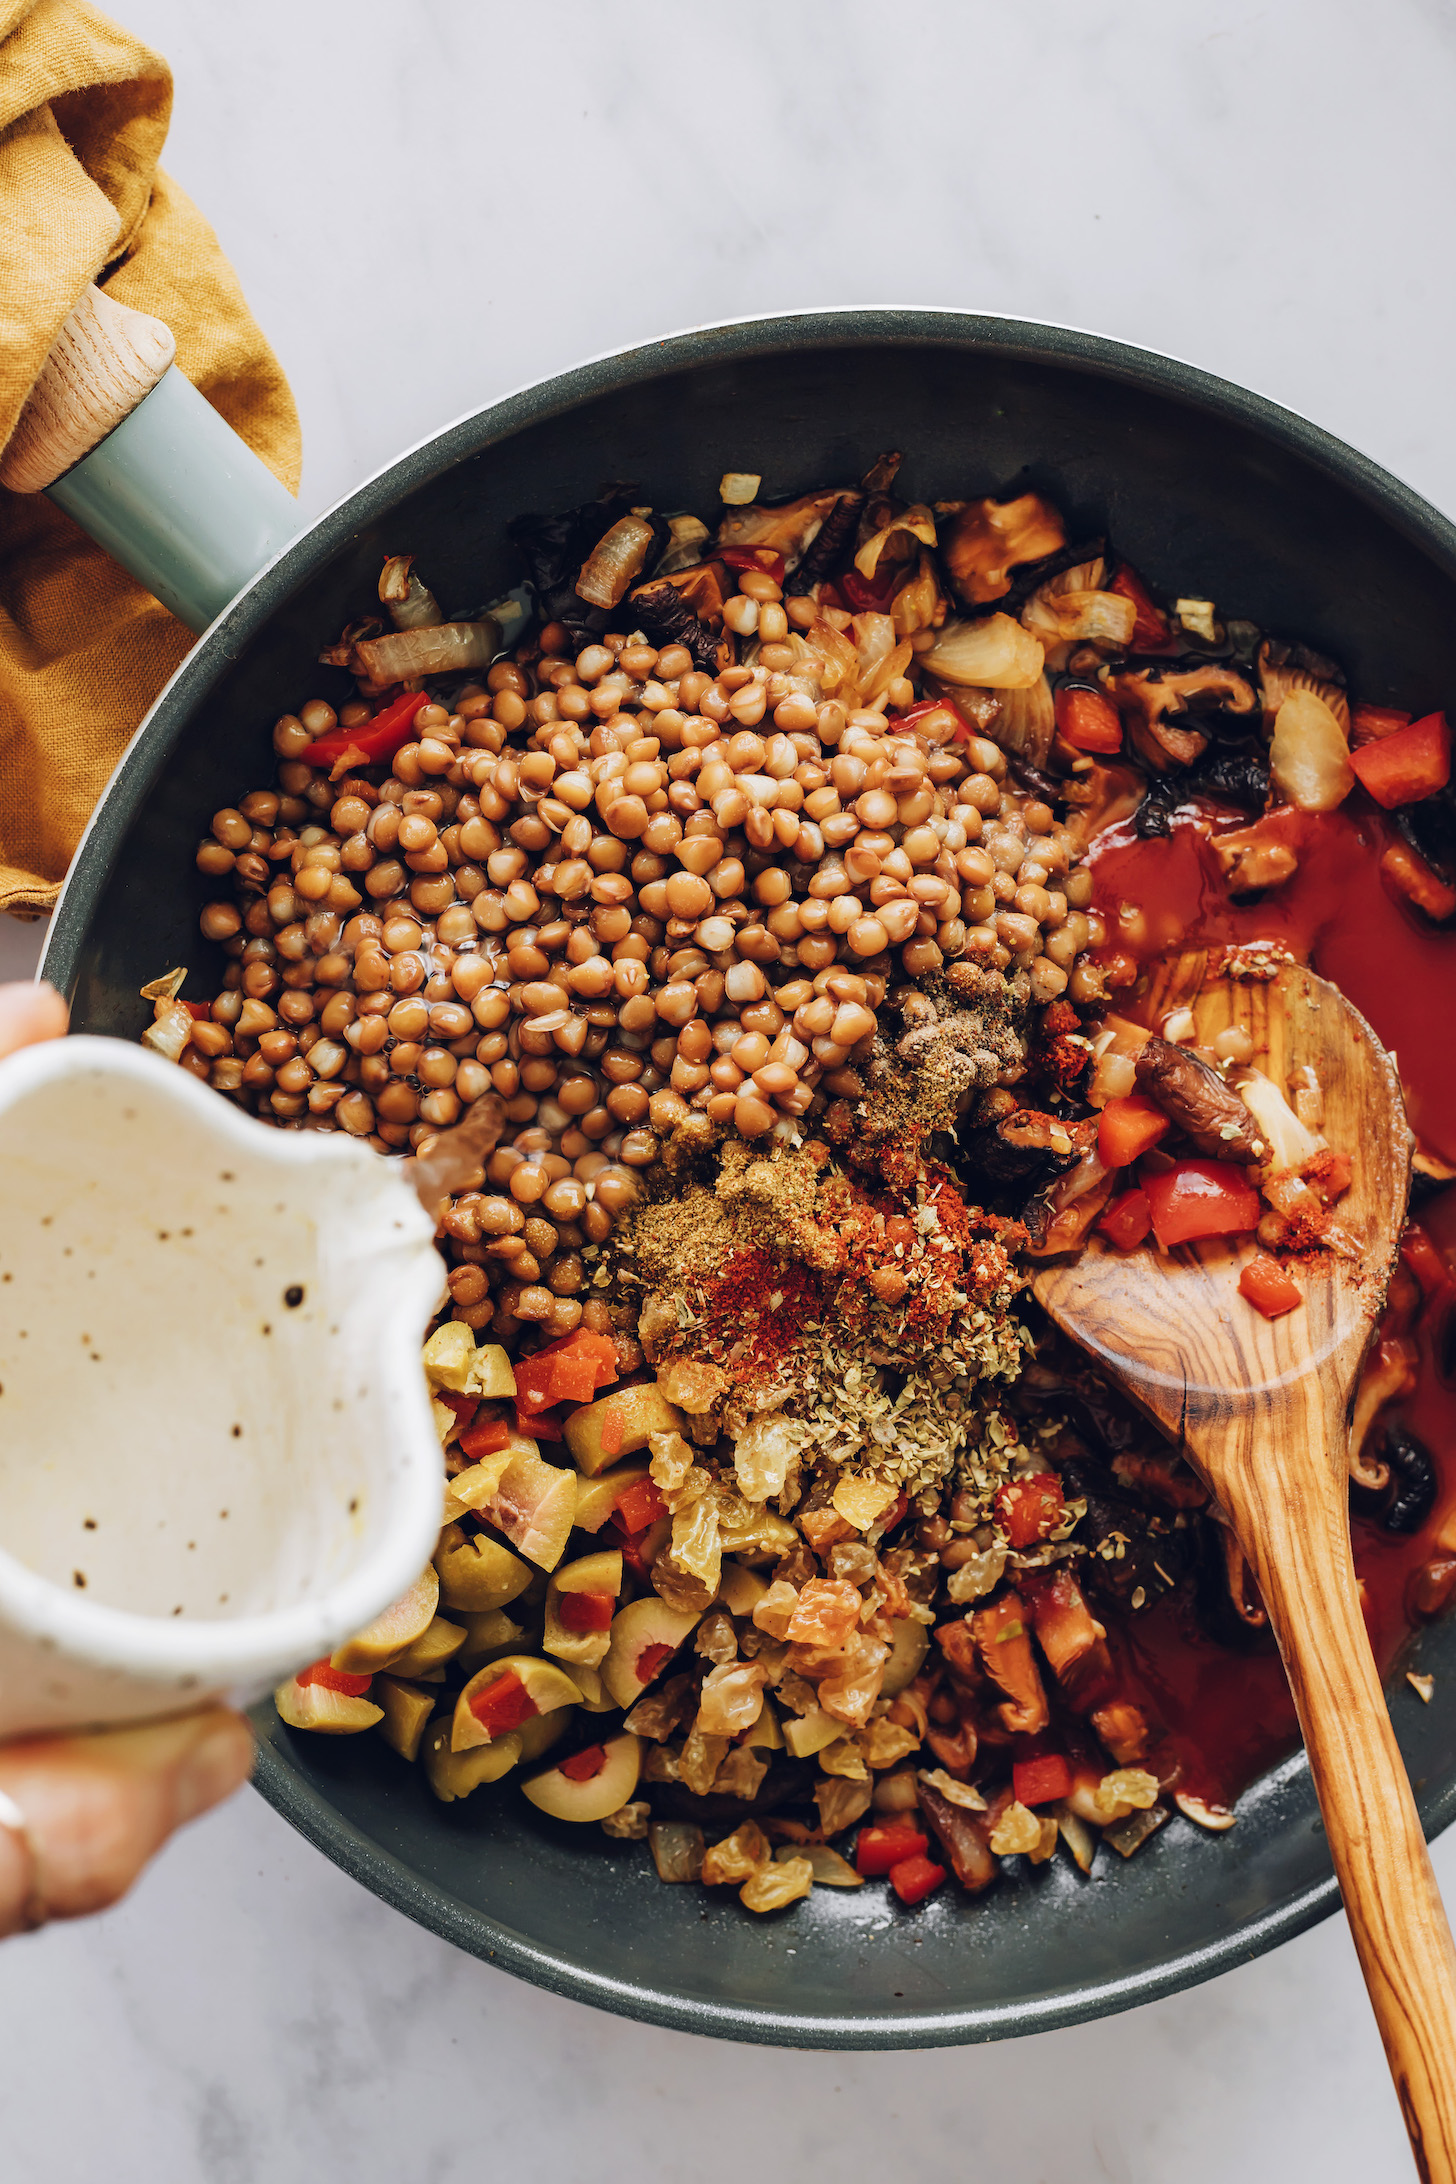 Pouring water over lentils, olives, and spices in a skillet